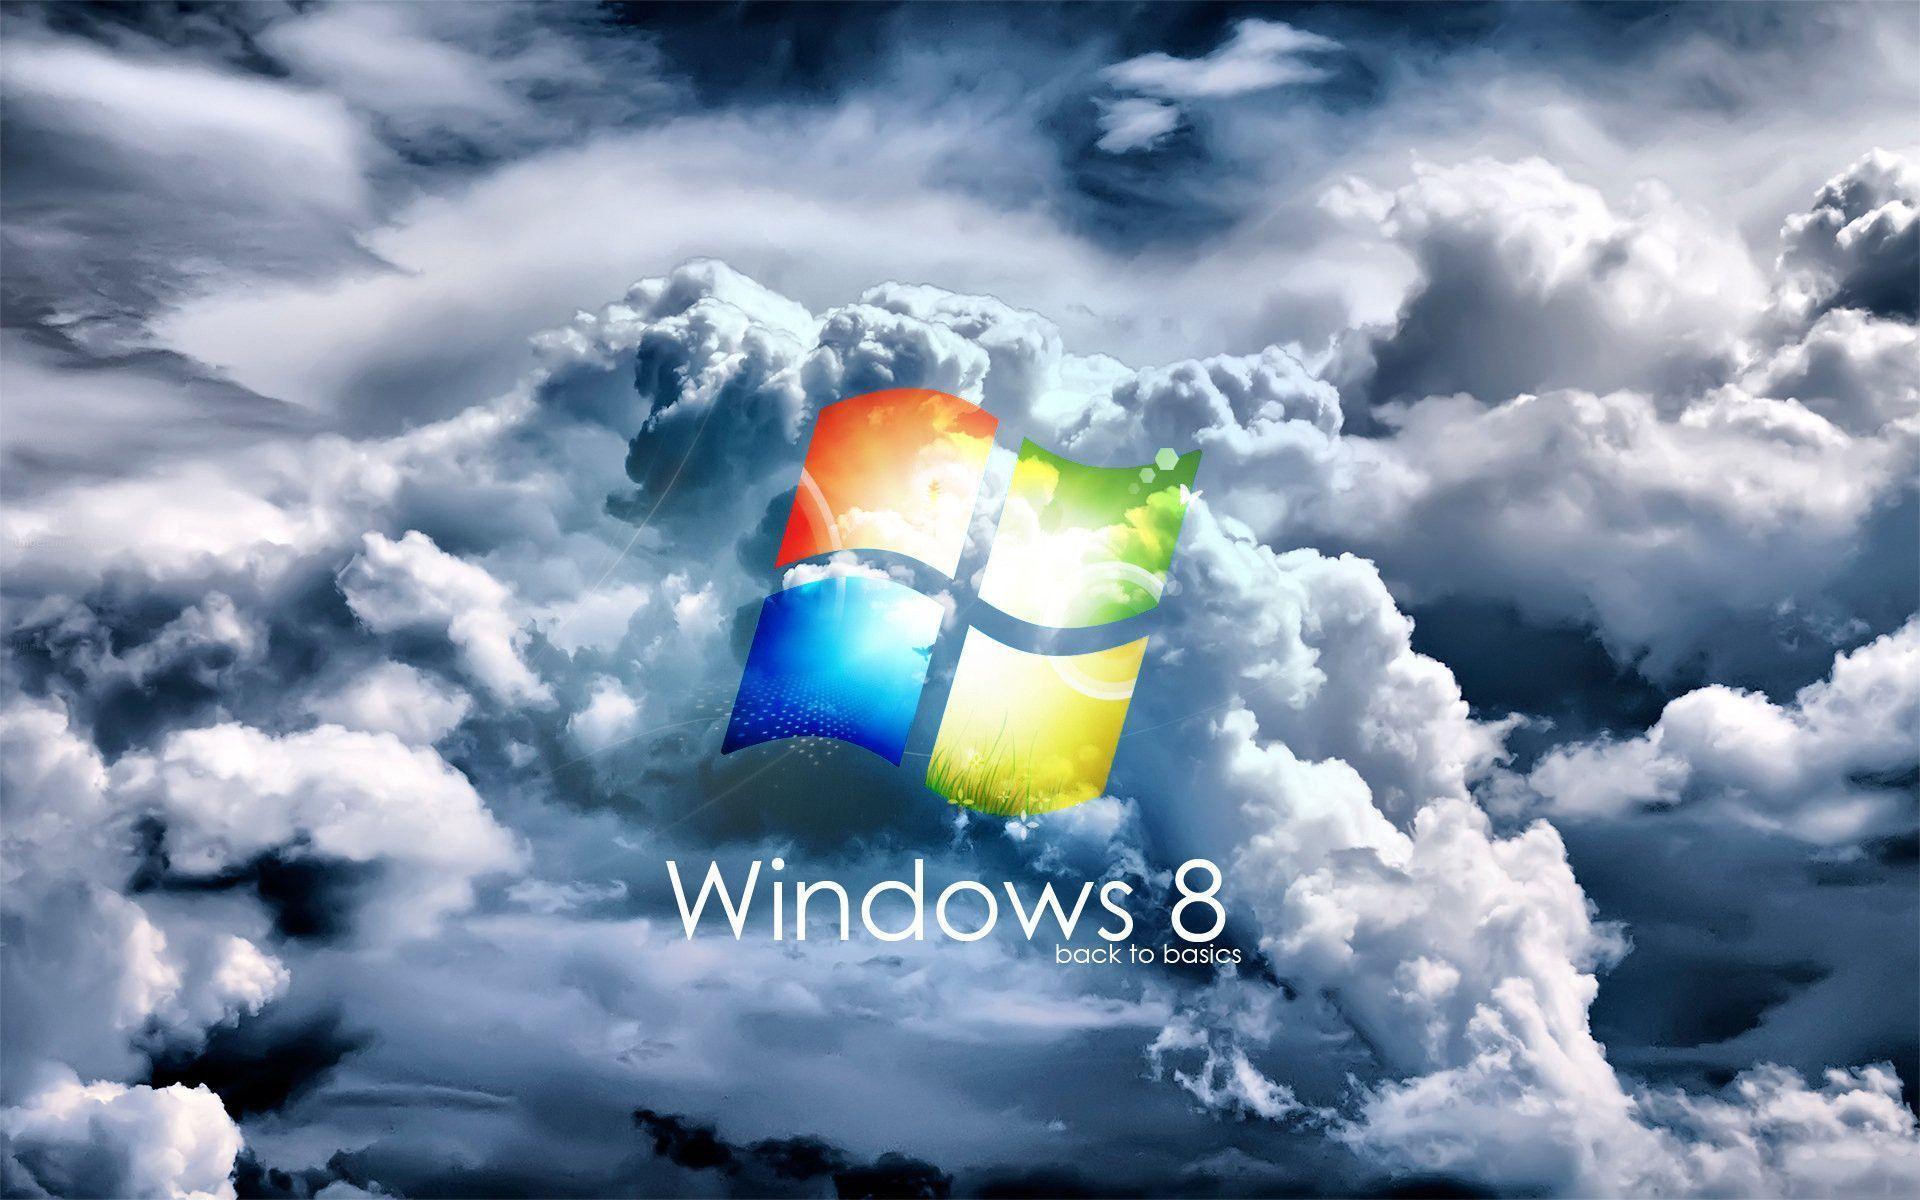 Download 30 Cool Windows 8 Wallpaper HD Collection. The Android